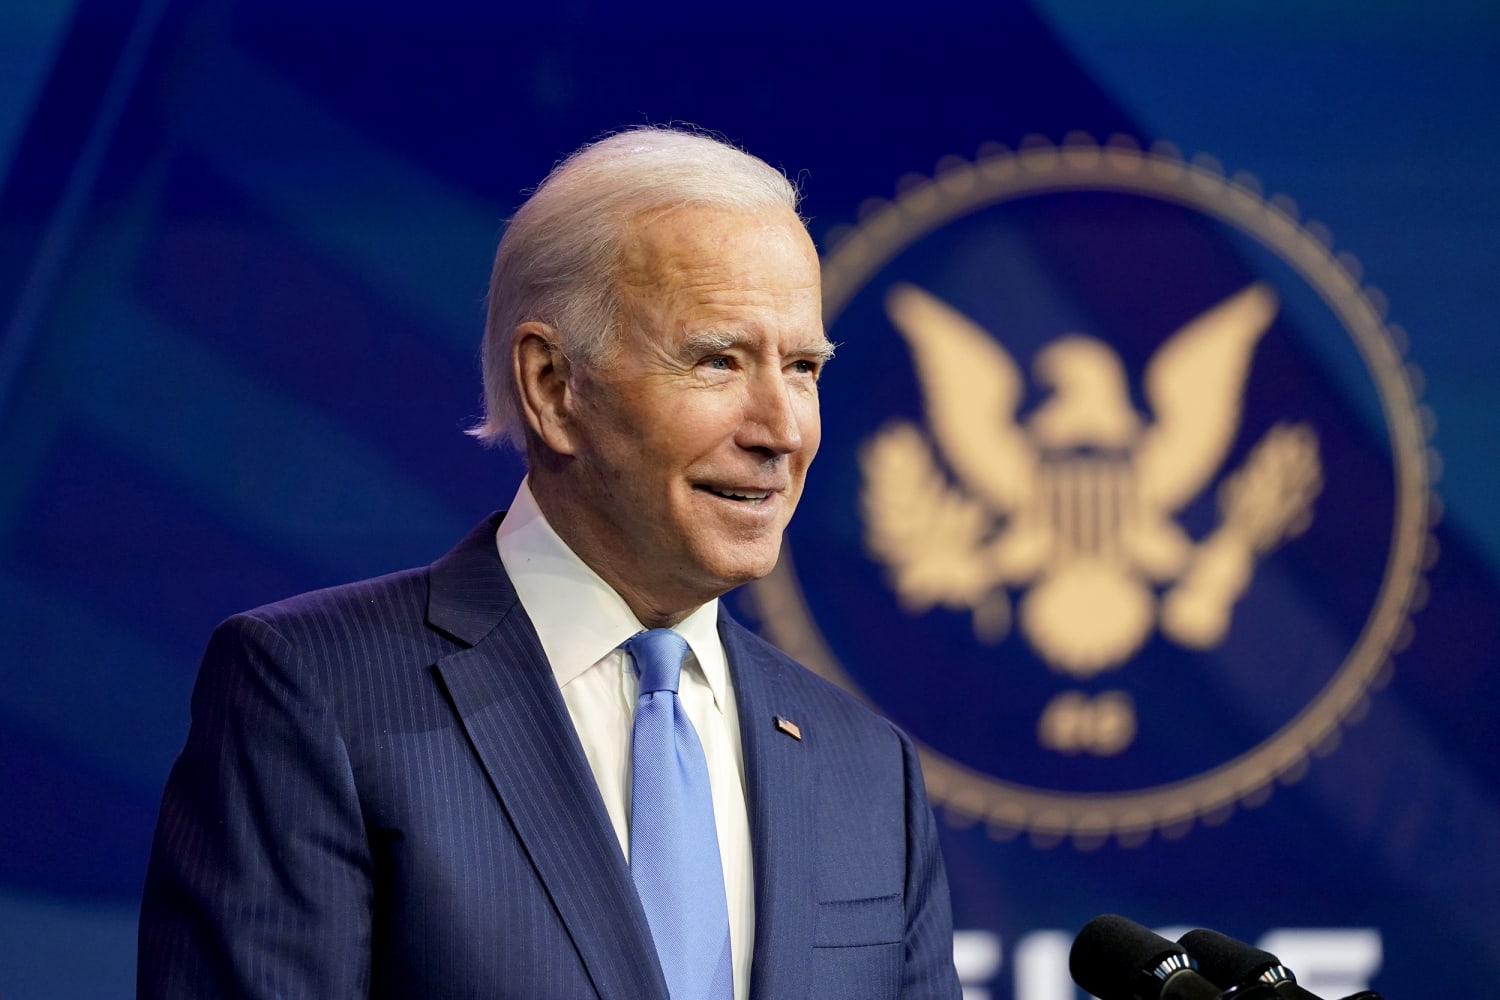 Biden scrambles to limit damage to credibility from Afghanistan